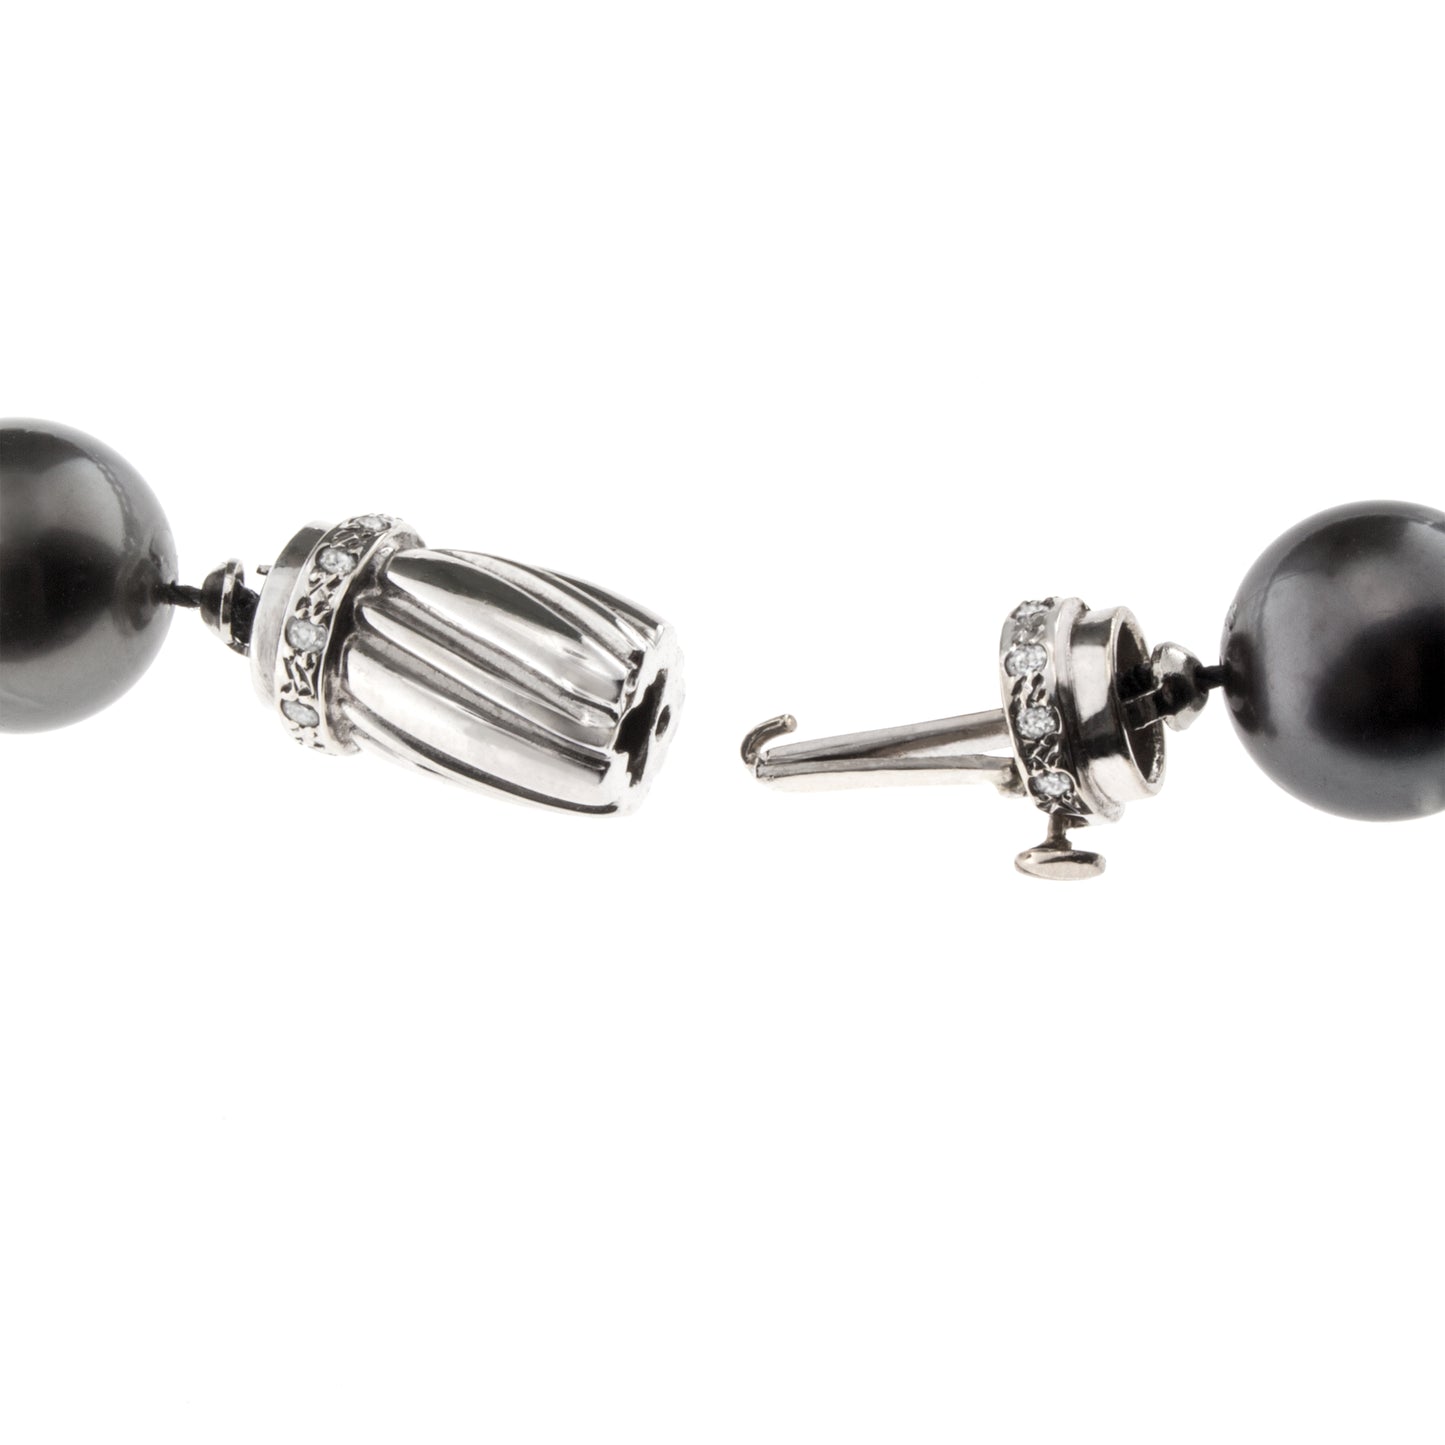 Tahitian Black Pearl Necklace with Four Diamond Rondelle and 14K White Gold Catch. Catch View